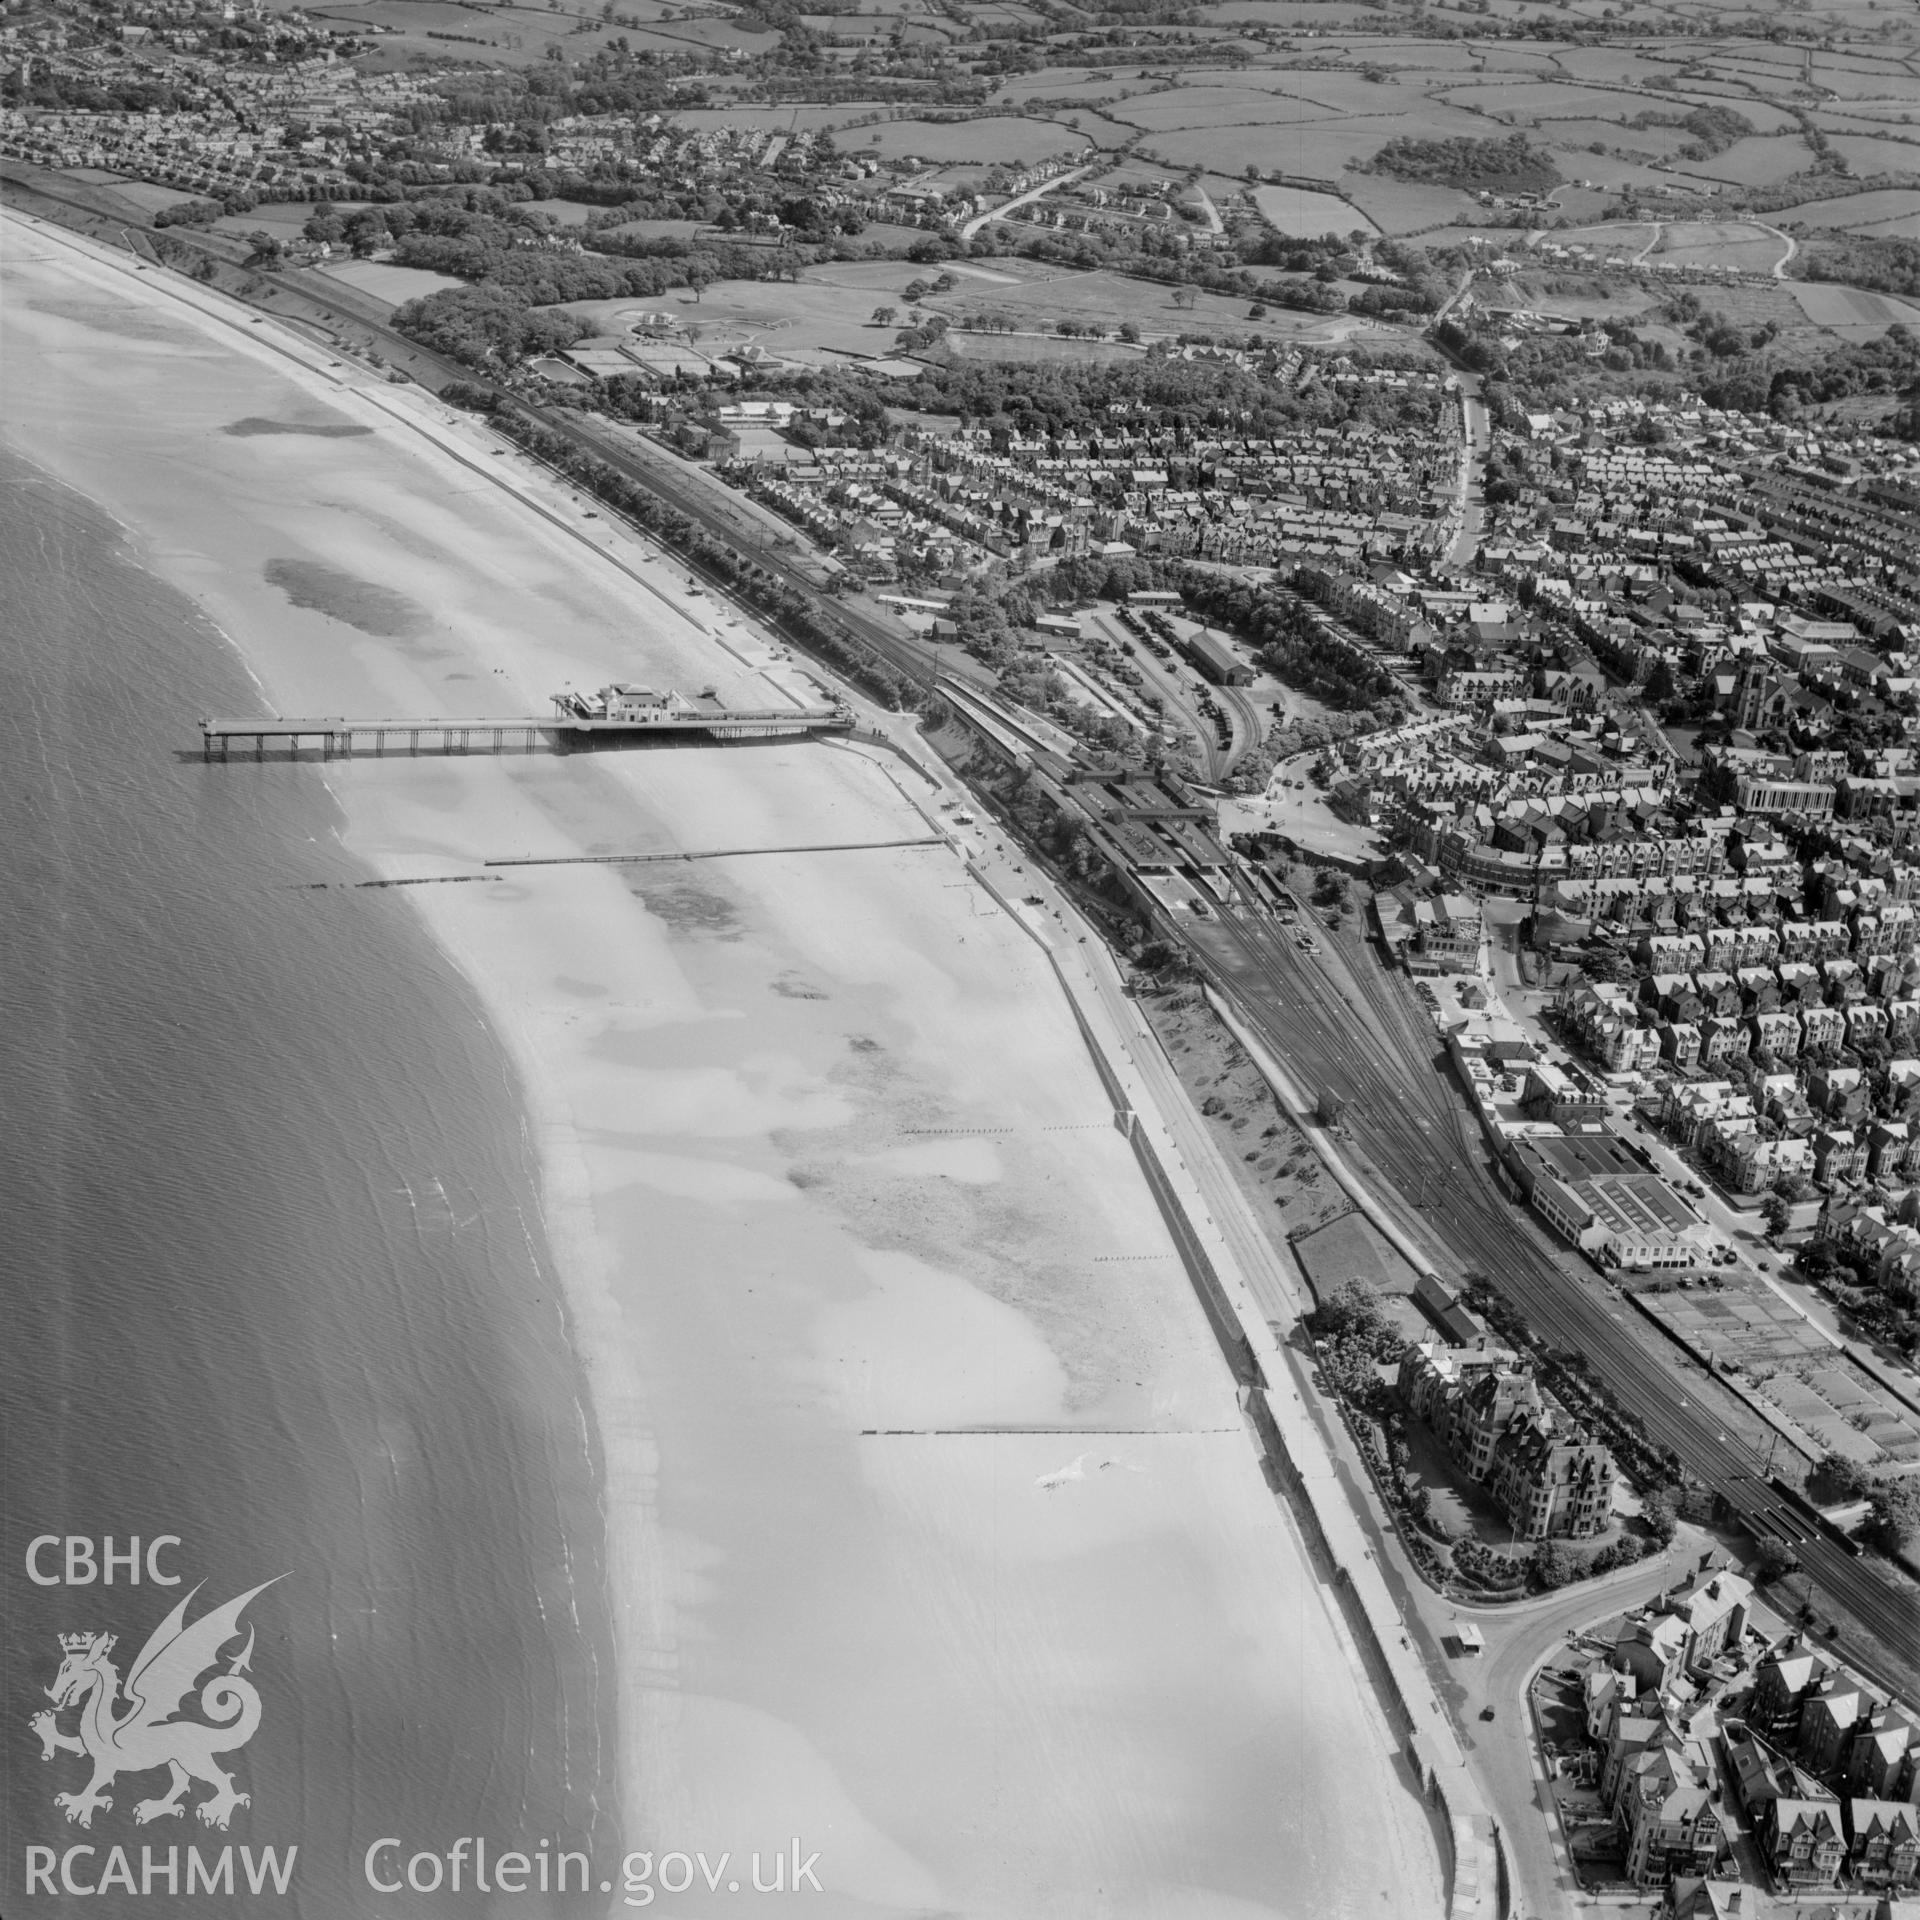 View of Colwyn Bay showing pier